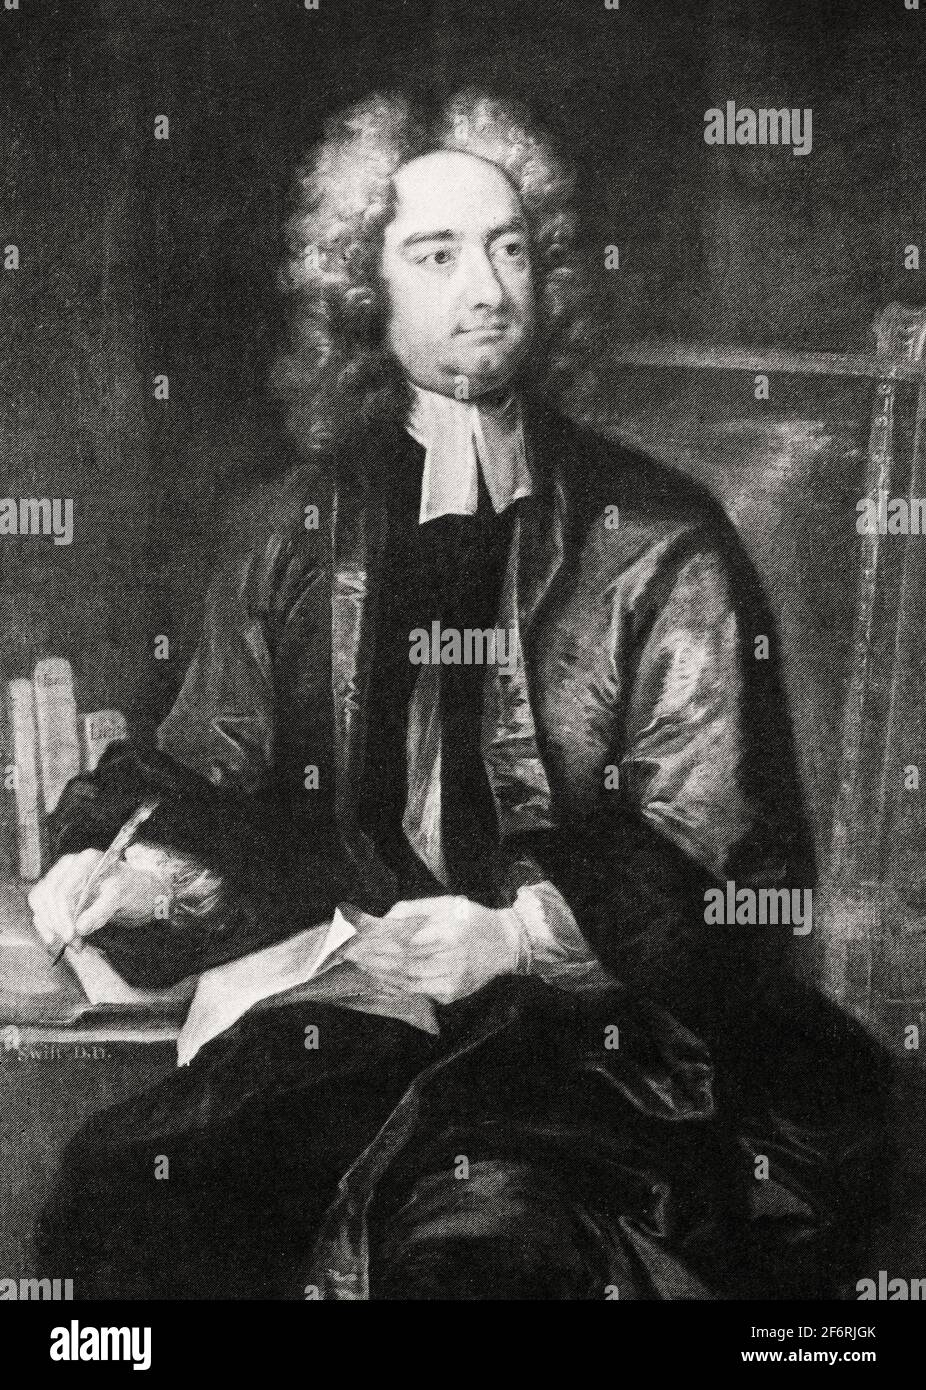 A portrait of Jonathan Swift (1667-1745), the Anglo-Irish satirist, essayist, political pamphleteer (first for the Whigs, then for the Tories), poet and Anglican cleric who became Dean of St Patrick's Cathedral, Dublin, hence his common sobriquet, 'Dean Swift'. Mainly remembered Gulliver's Travels (1726), he is regarded as the foremost prose satirist in the English language. He wrote other works and is less well known for his poetry. Stock Photo